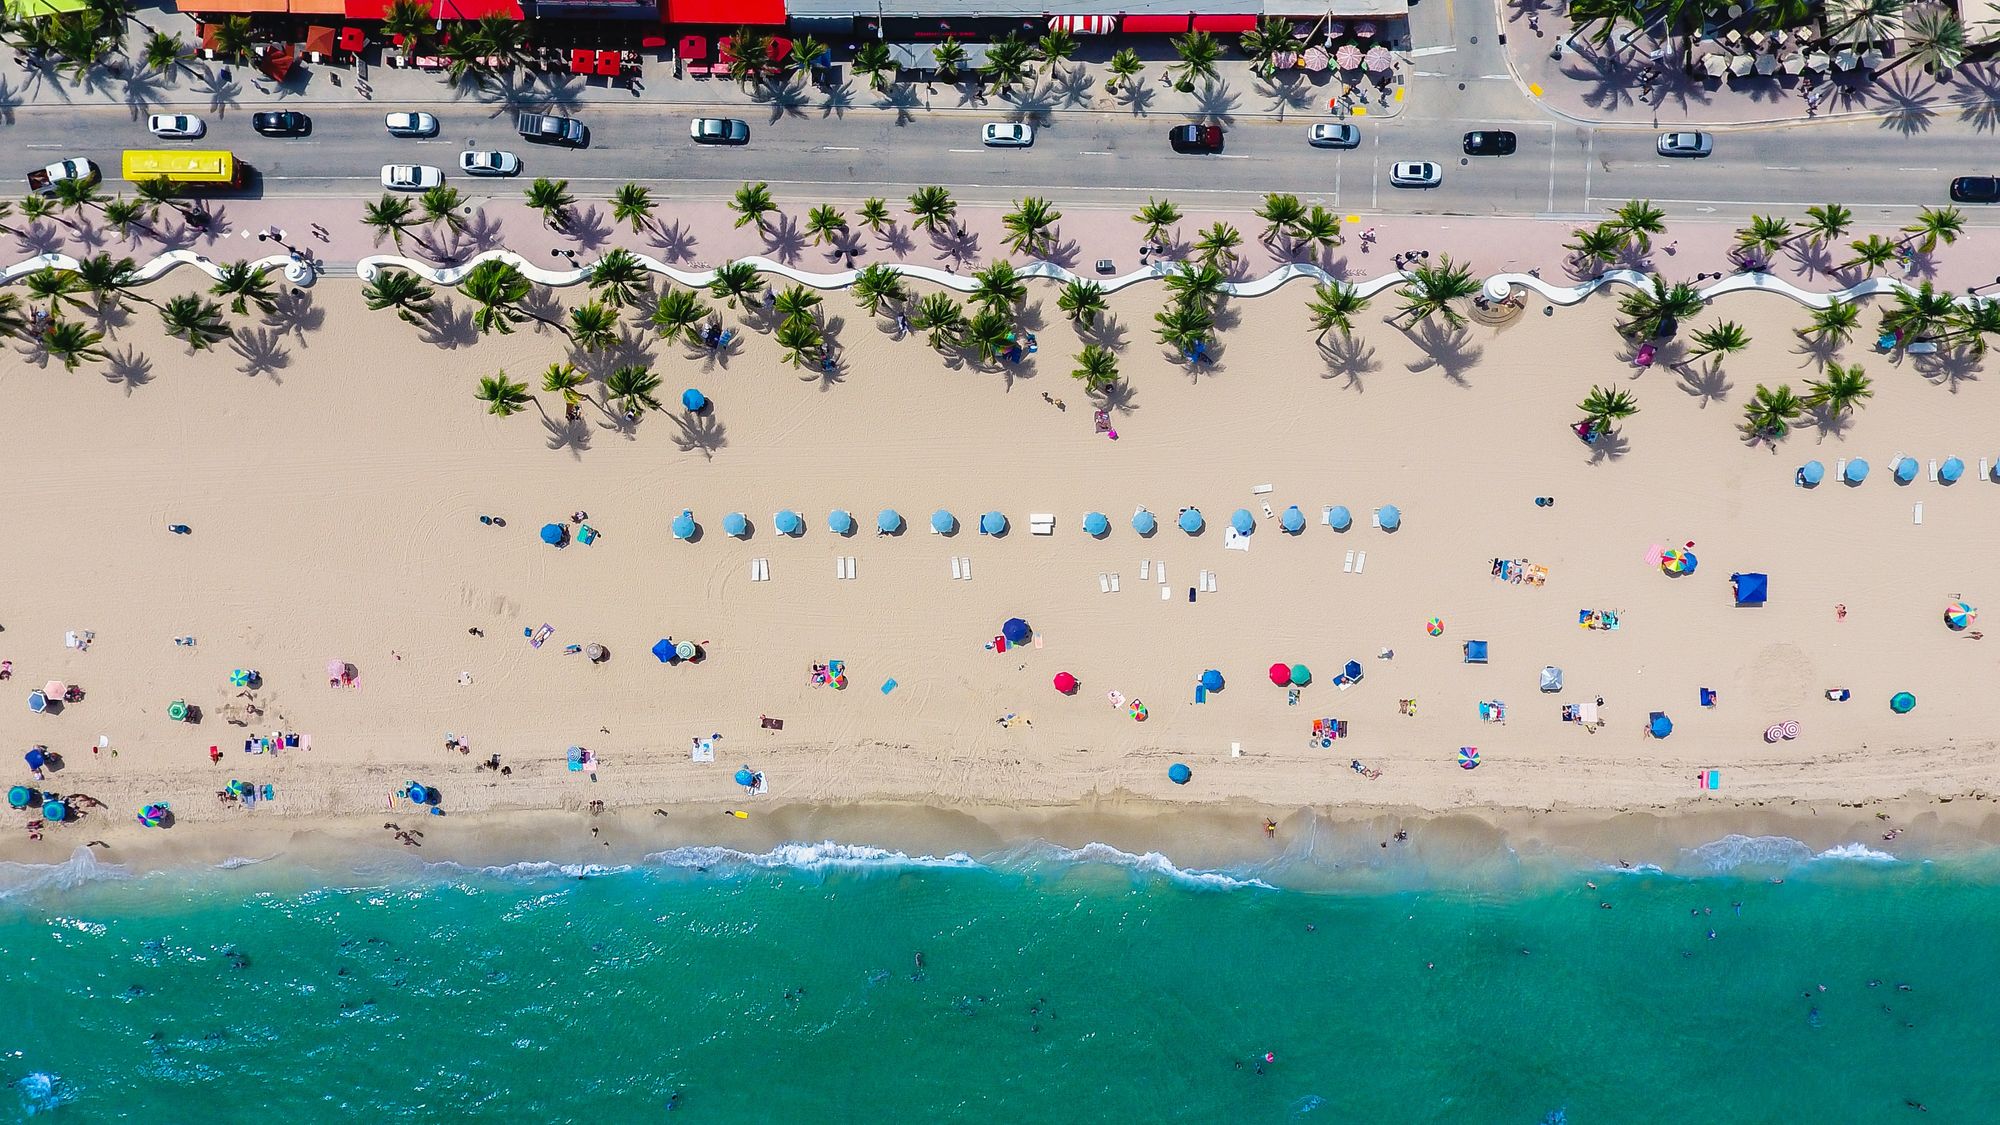 Fort Lauderdale Beach has beach wheelchairs available for use